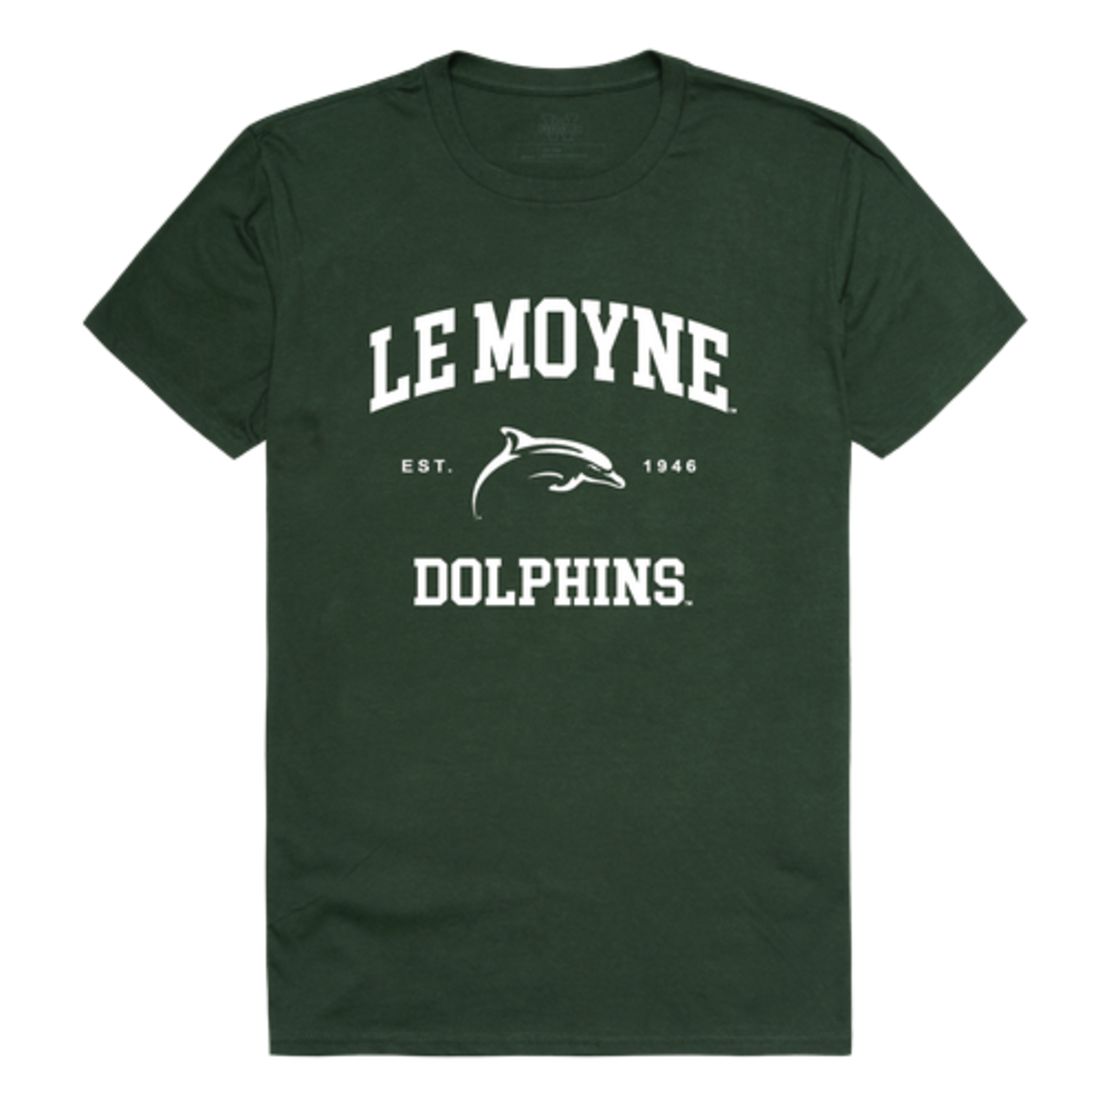 Le Moyne College Dolphins Seal T-Shirt Tee